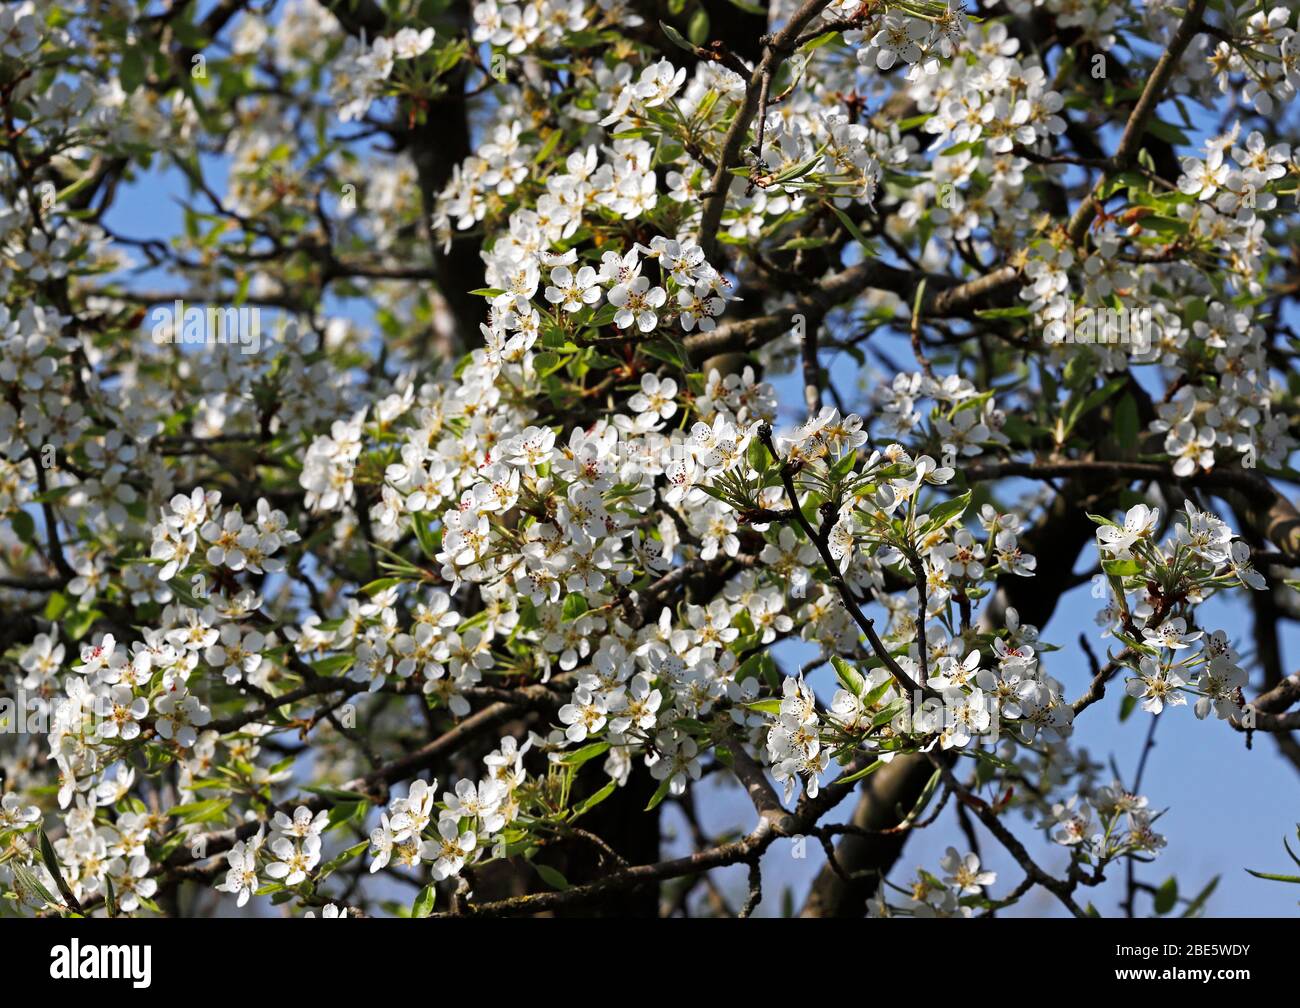 The white blossom of a traditional Robin Pear fruit tree, Pyrus communis, in an English garden. Stock Photo